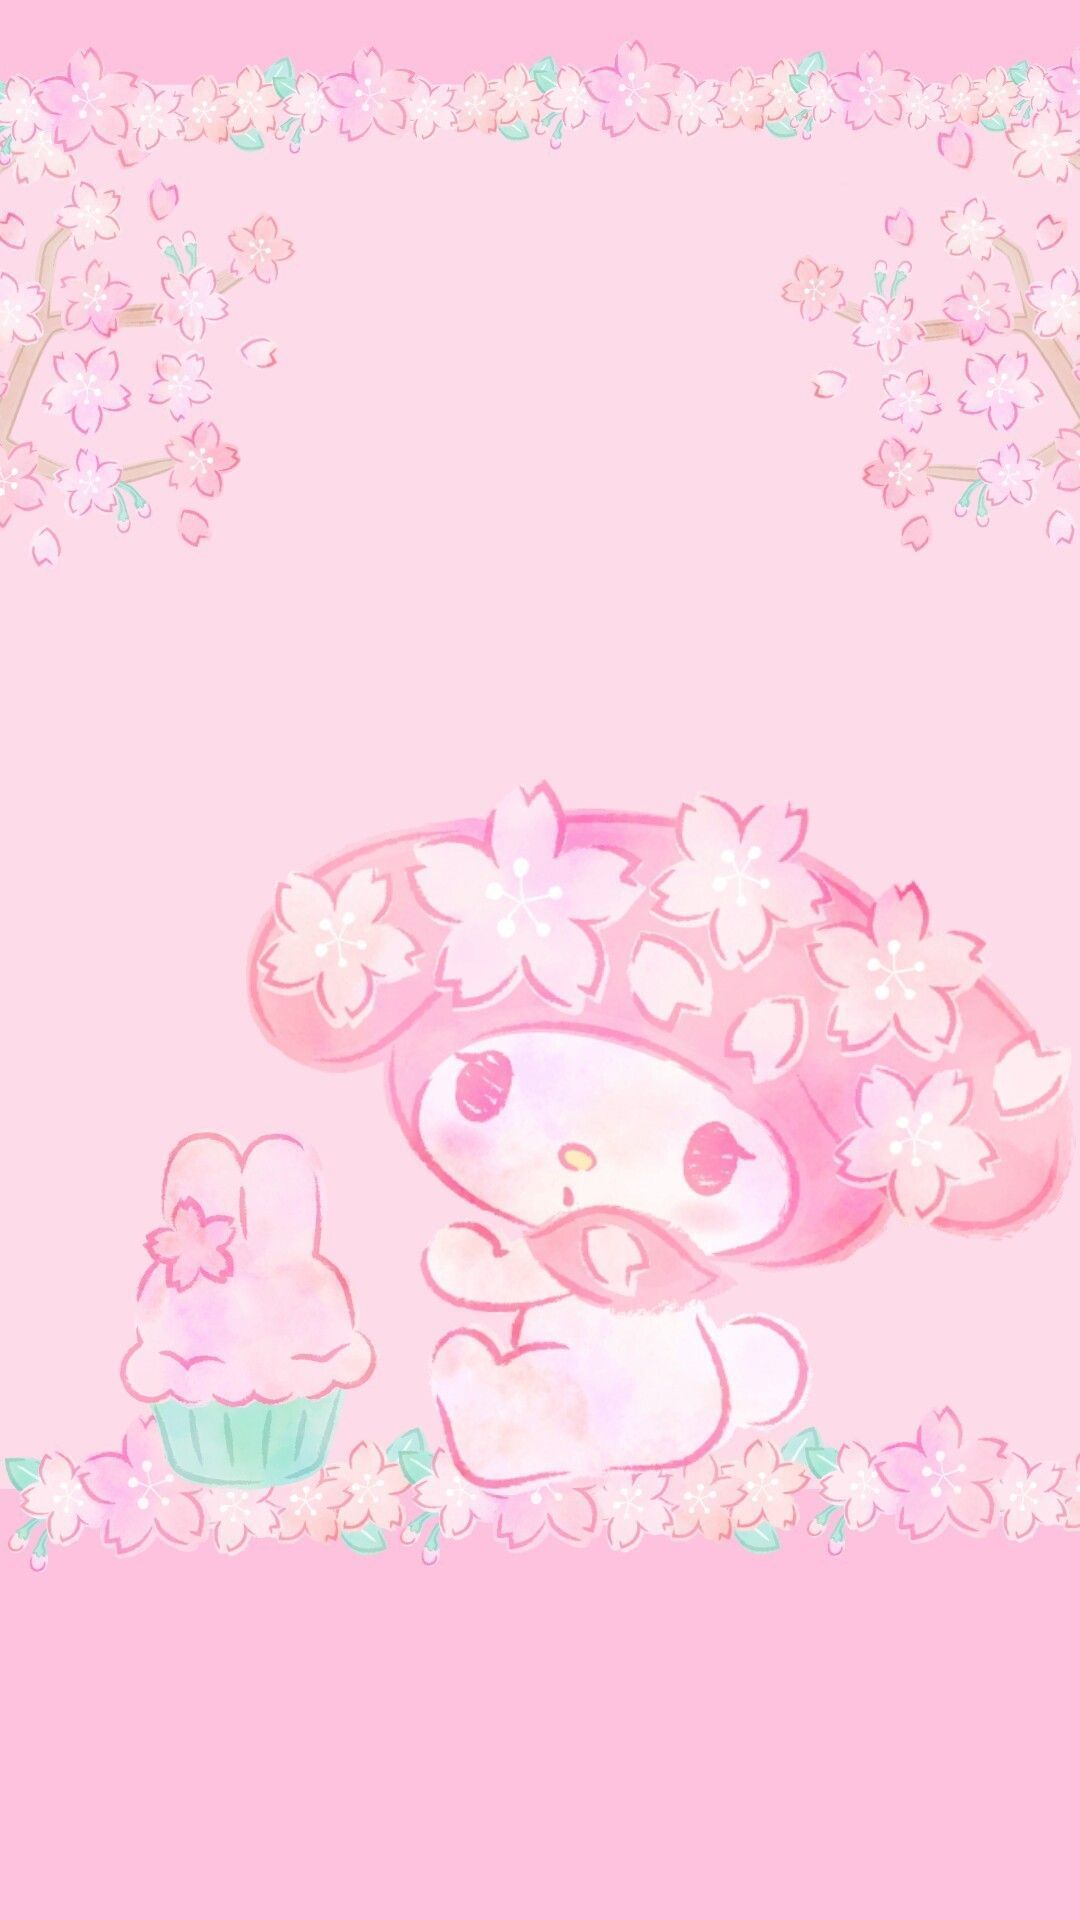 My Melody Wallpaper for iPhone with high-resolution 1080x1920 pixel. You can use this wallpaper for your iPhone 5, 6, 7, 8, X, XS, XR backgrounds, Mobile Screensaver, or iPad Lock Screen - My Melody